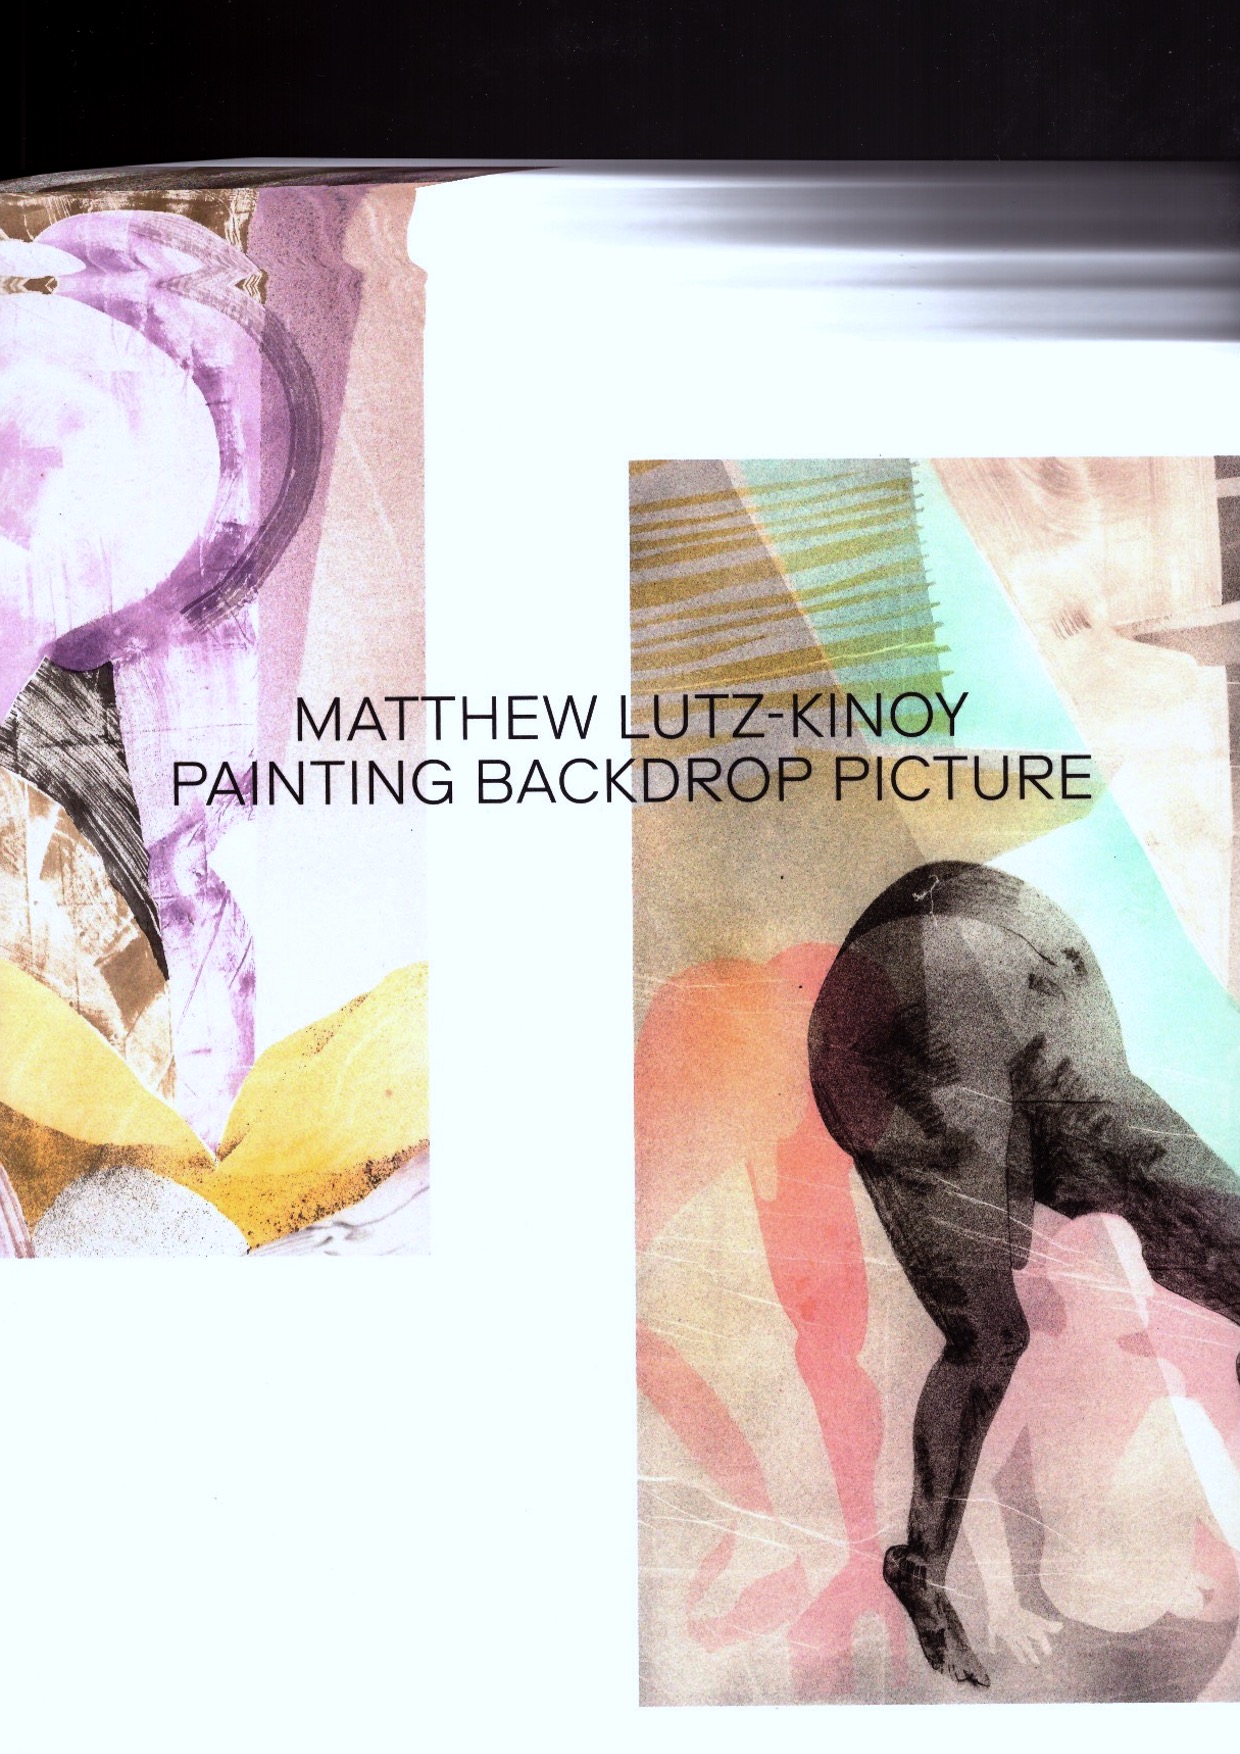 LUTZ-KINOY, Matthew - Painting Backdrop Picture